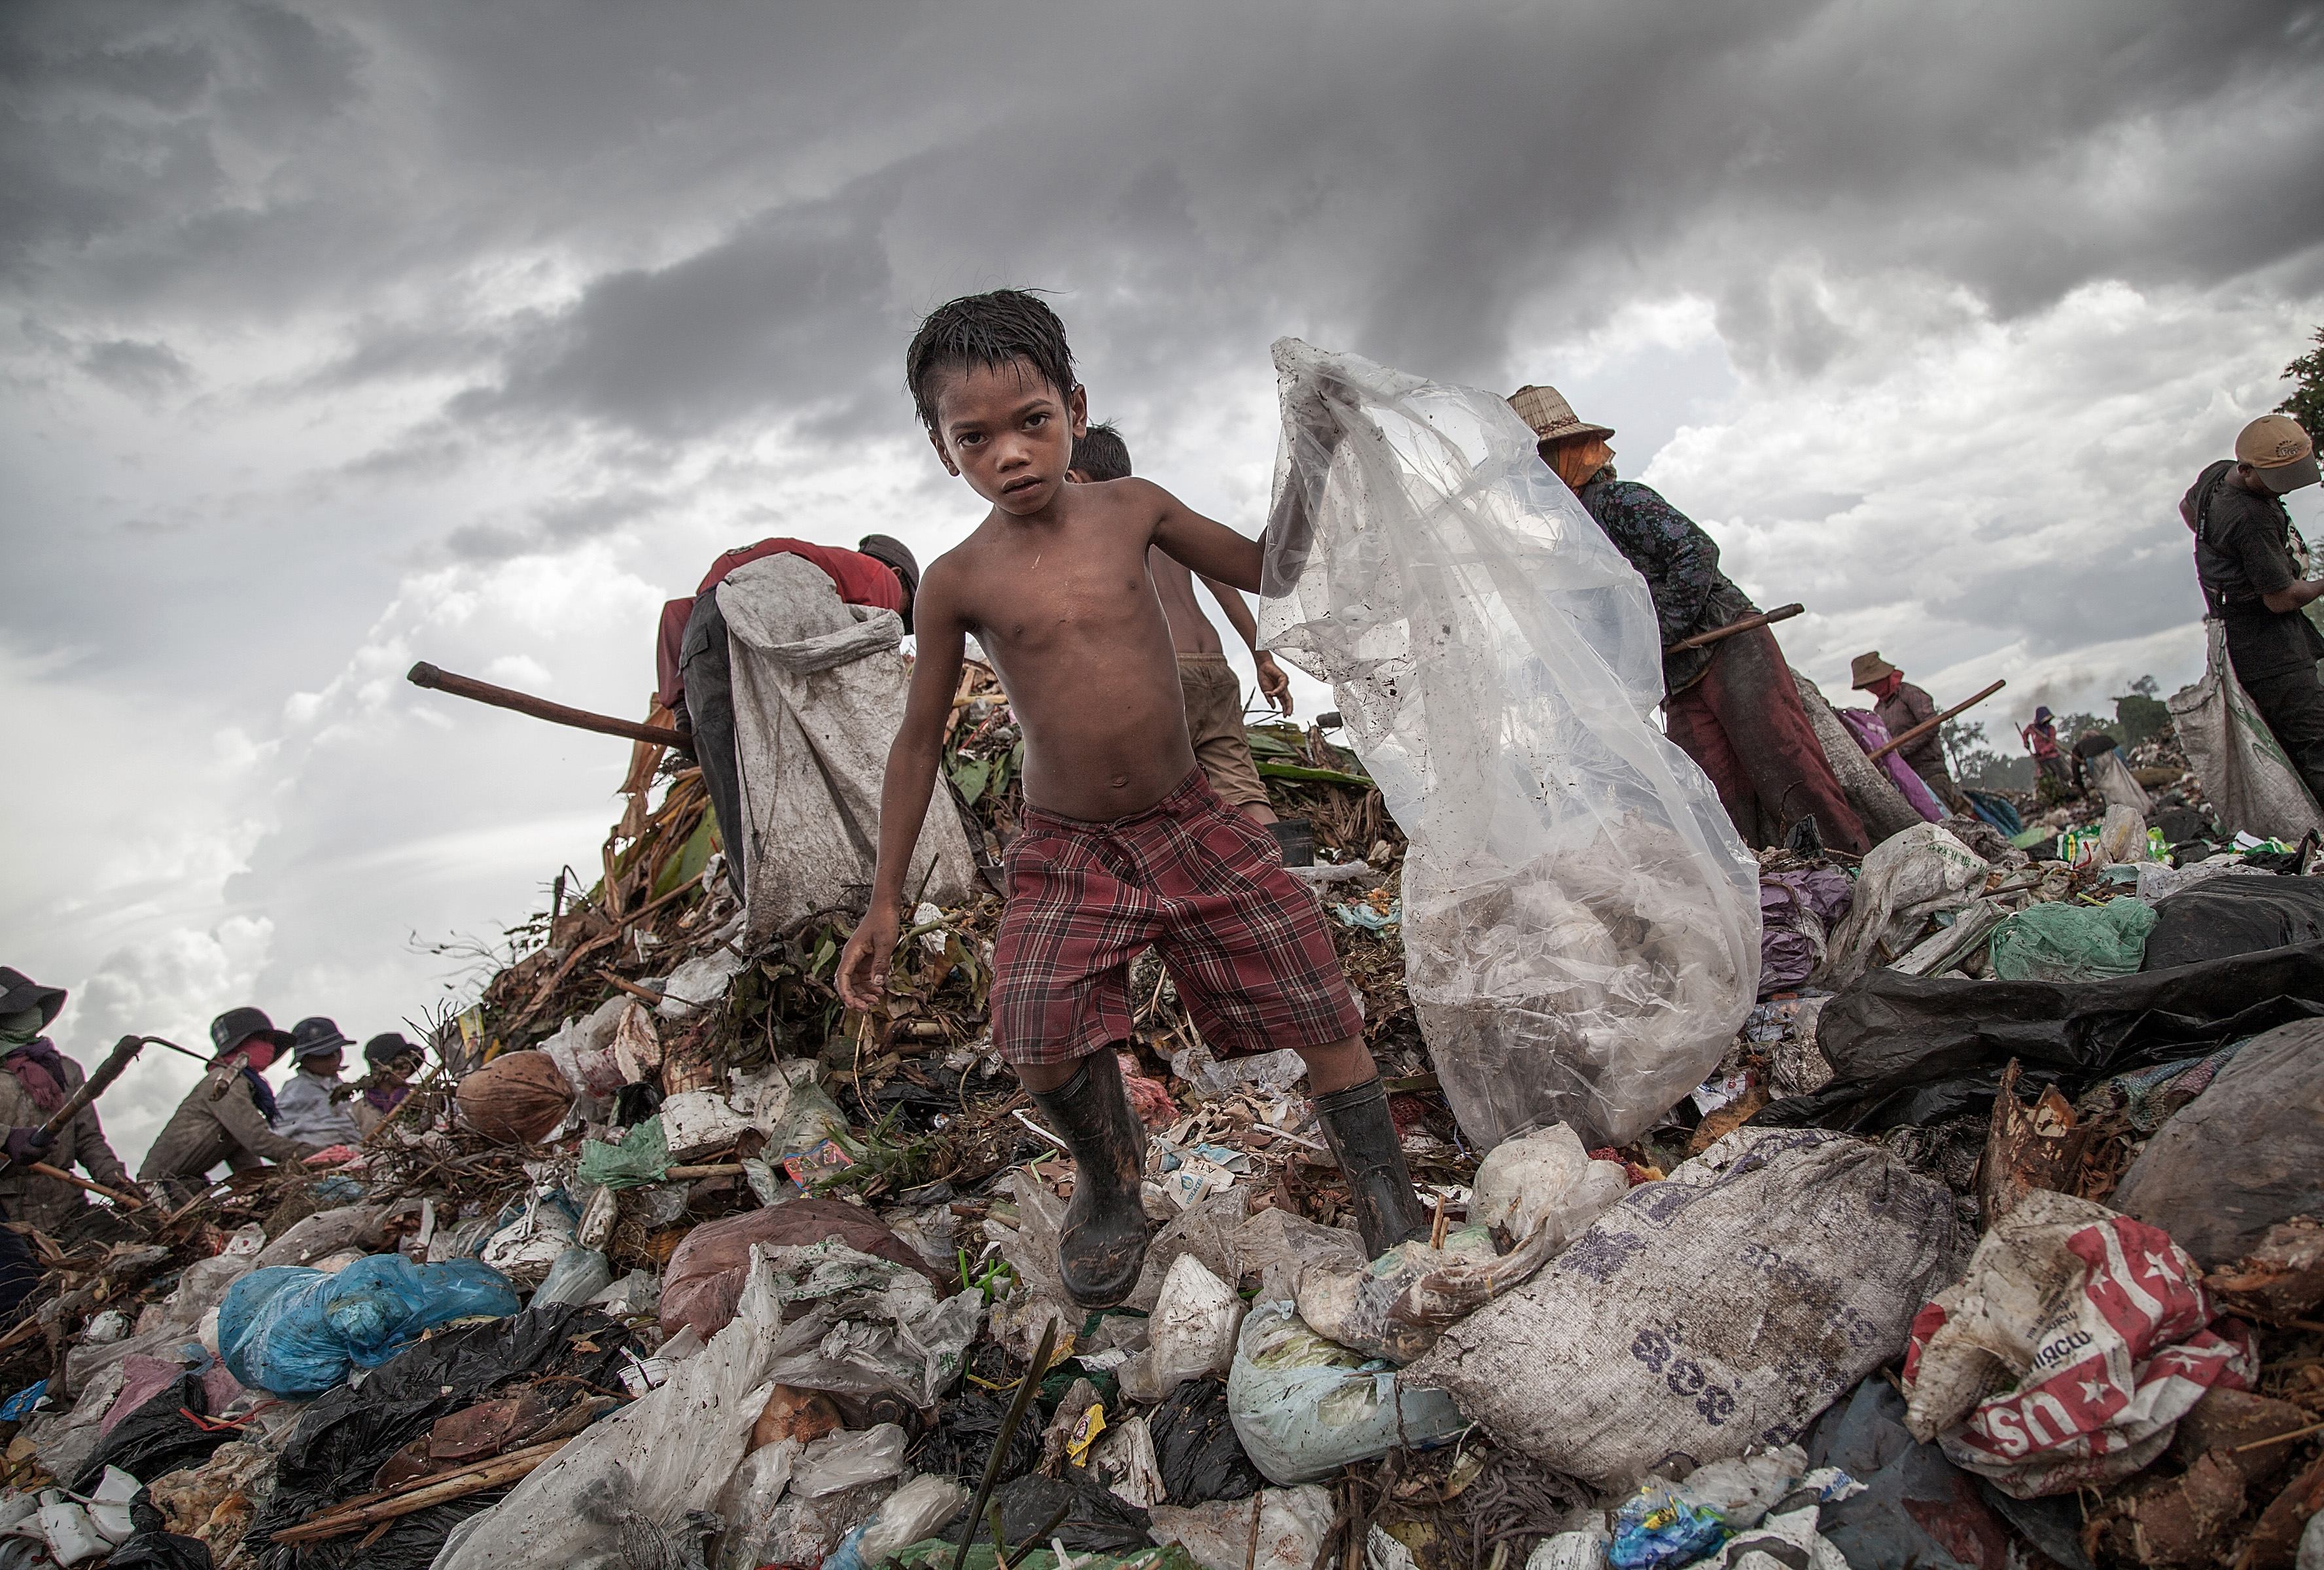 A young boy collects plastic from a landfill in Cambodia